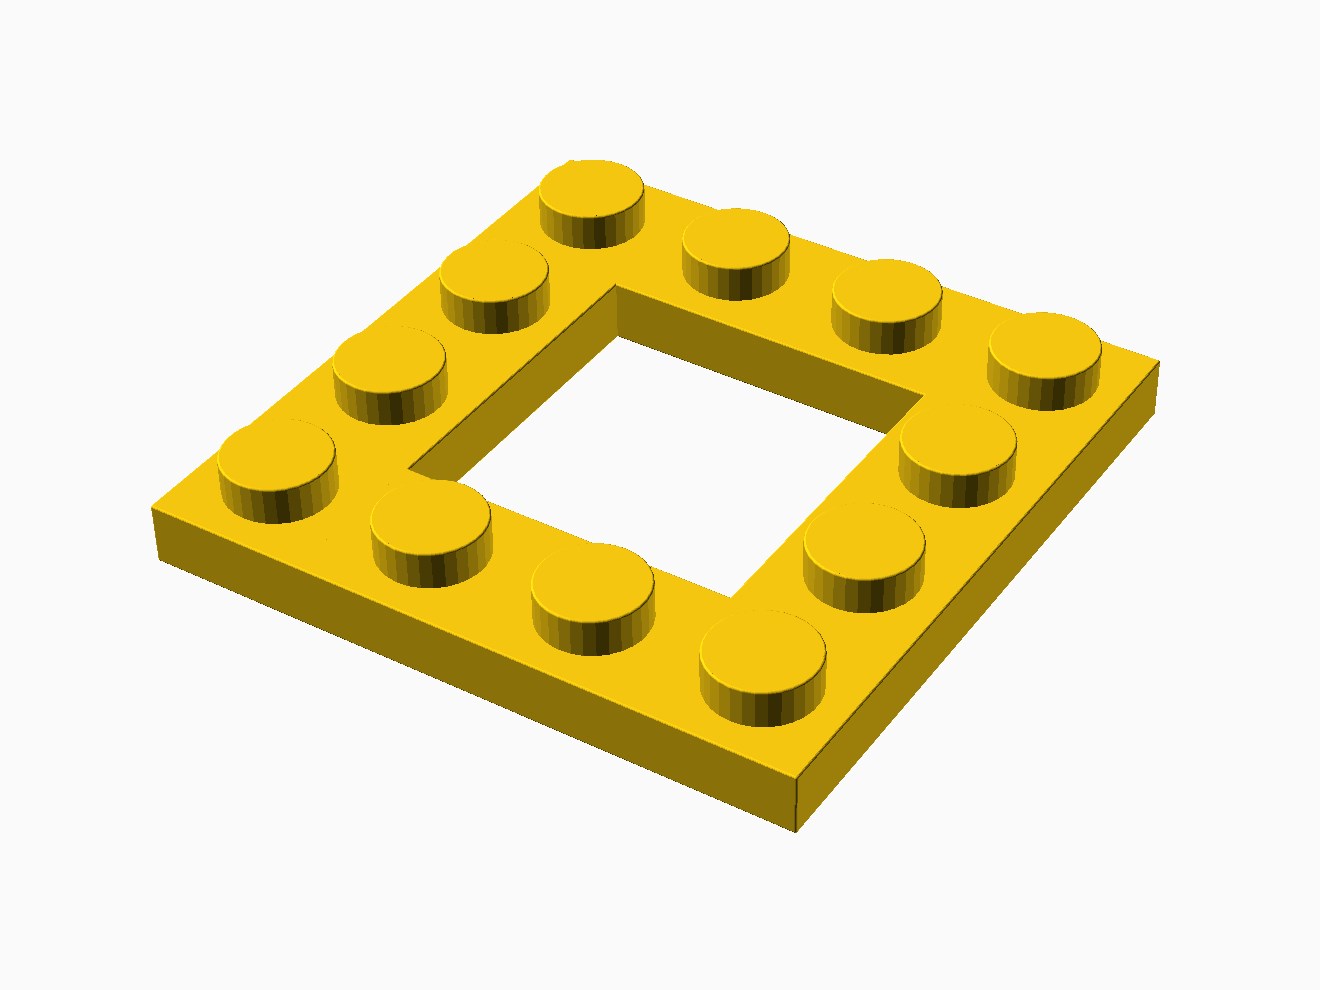 3D printable model of a LEGO 4x4 plate with a 2x2 hole.